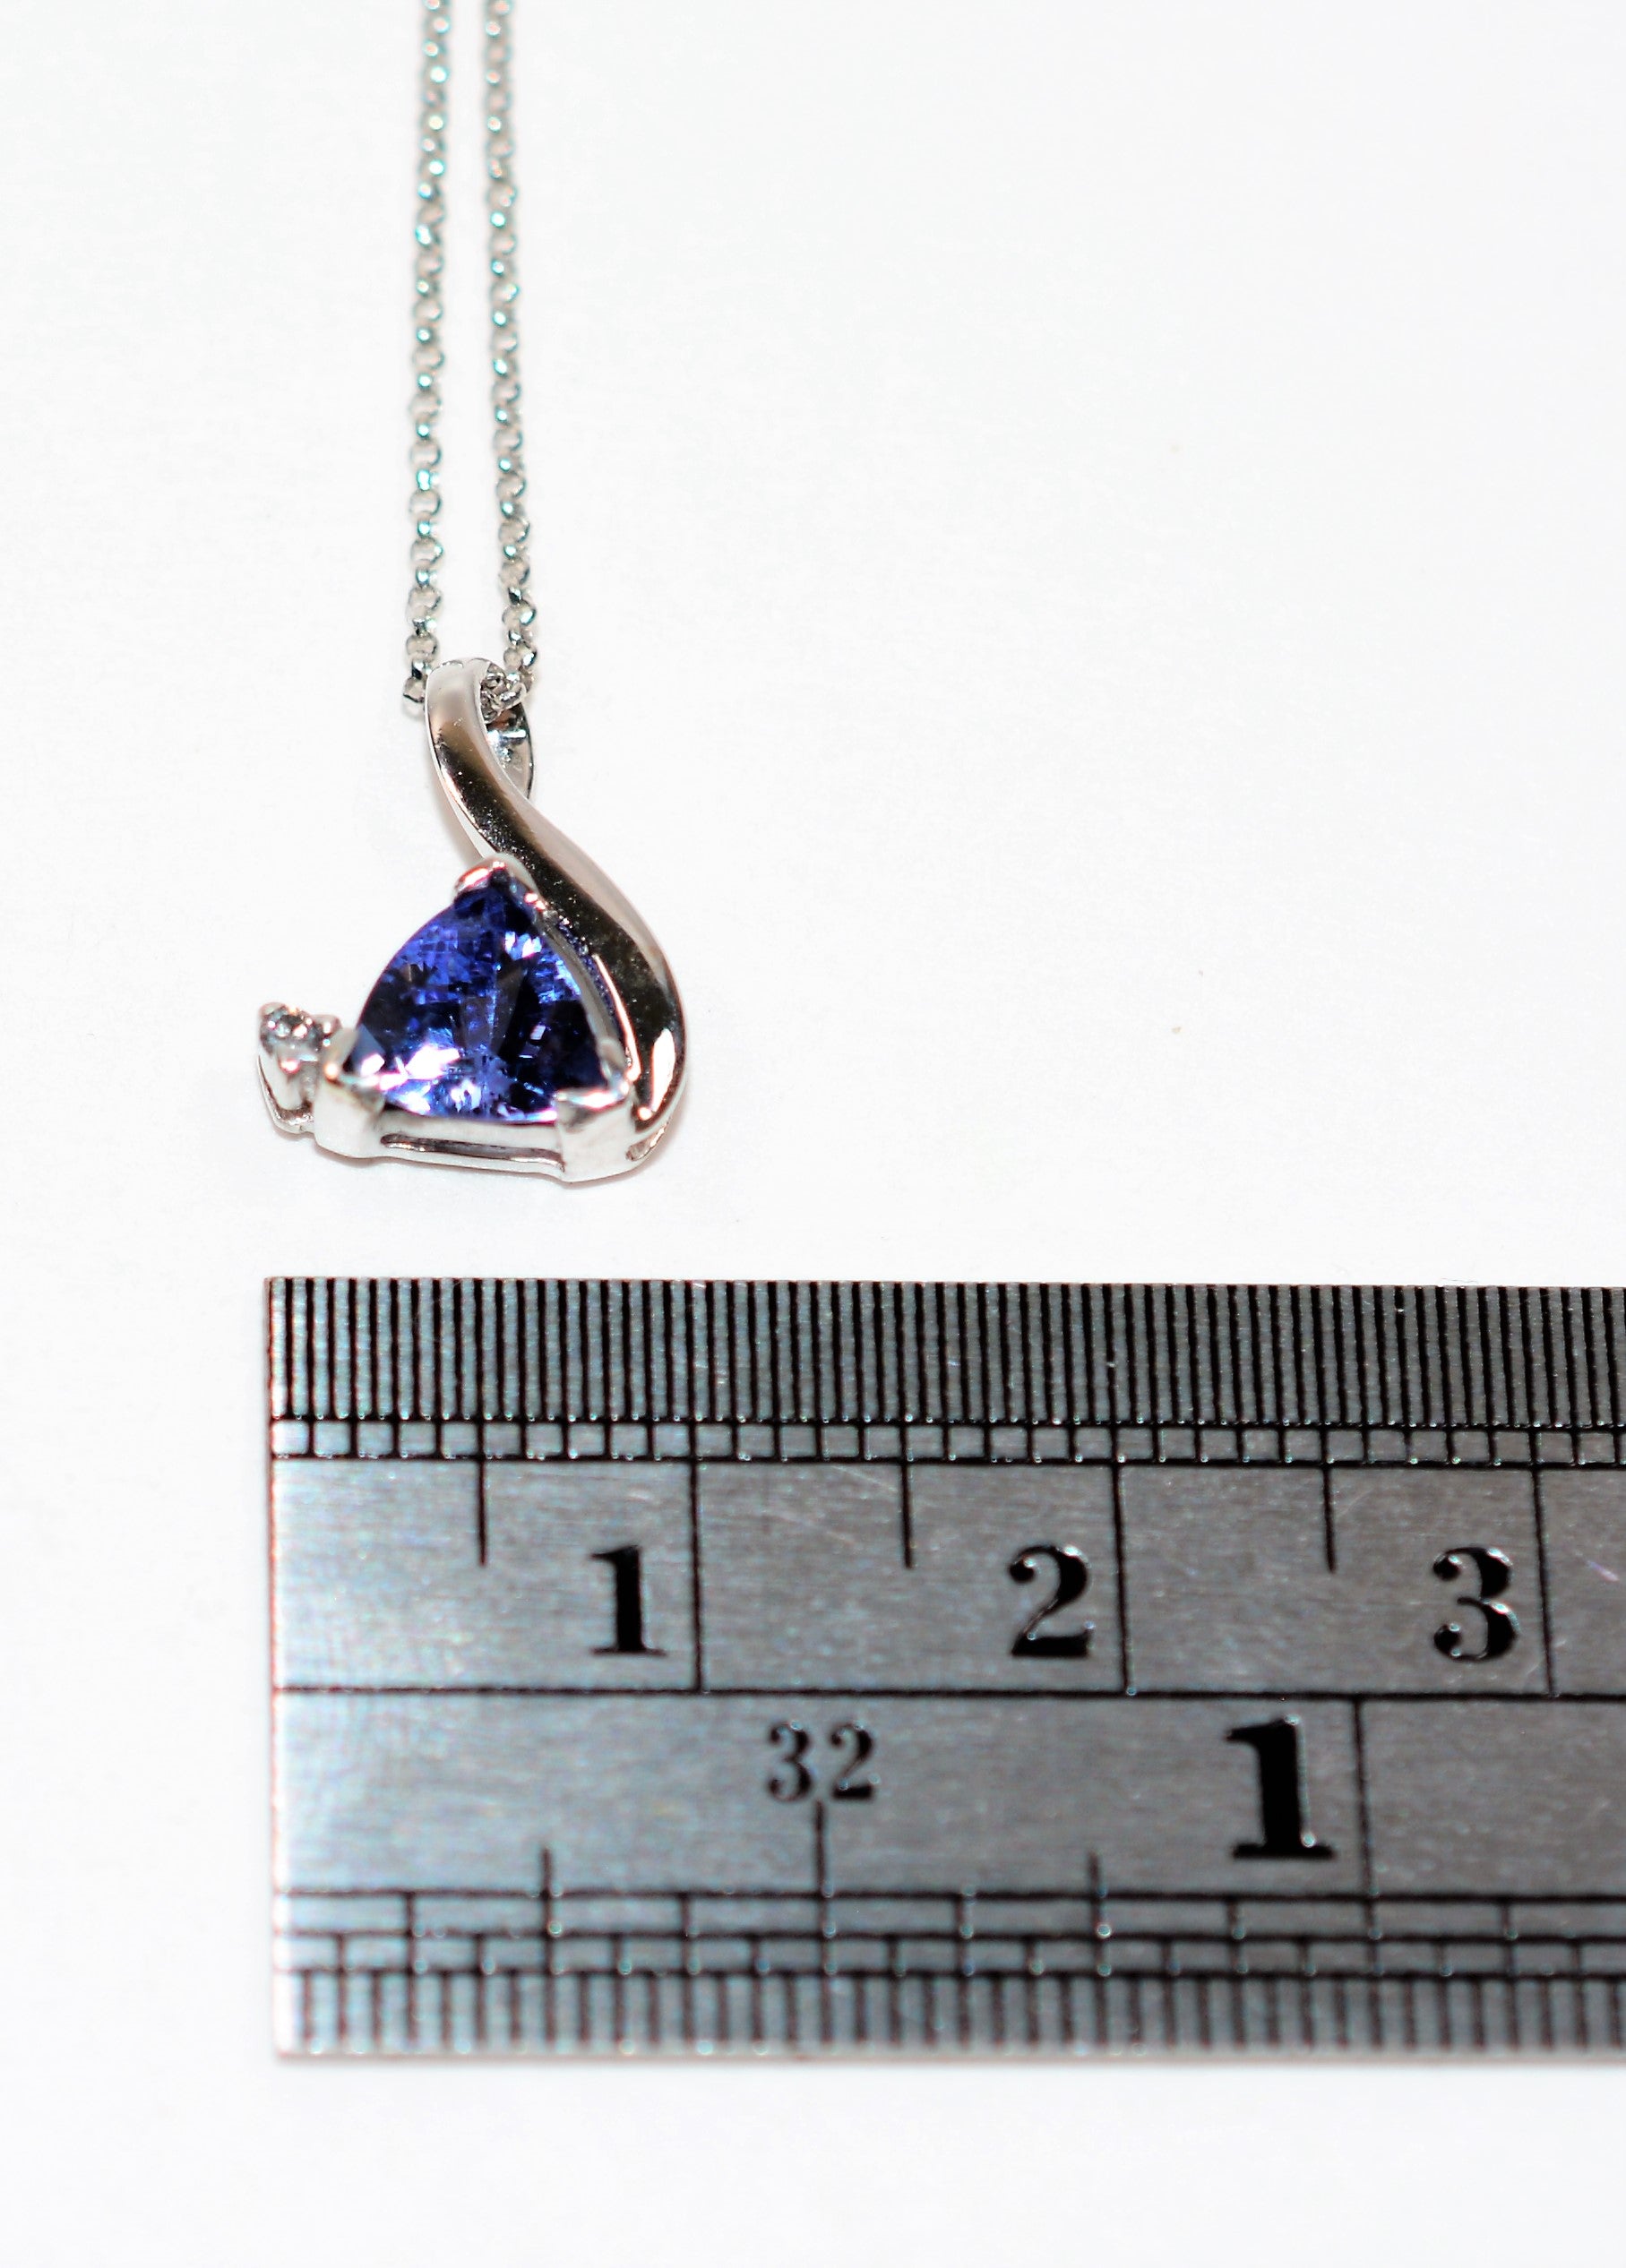 Natural Tanzanite & Diamond Necklace 14K Solid White Gold .91tcw Gemstone Necklace Cocktail Necklace Purple Necklace Birthstone Necklace